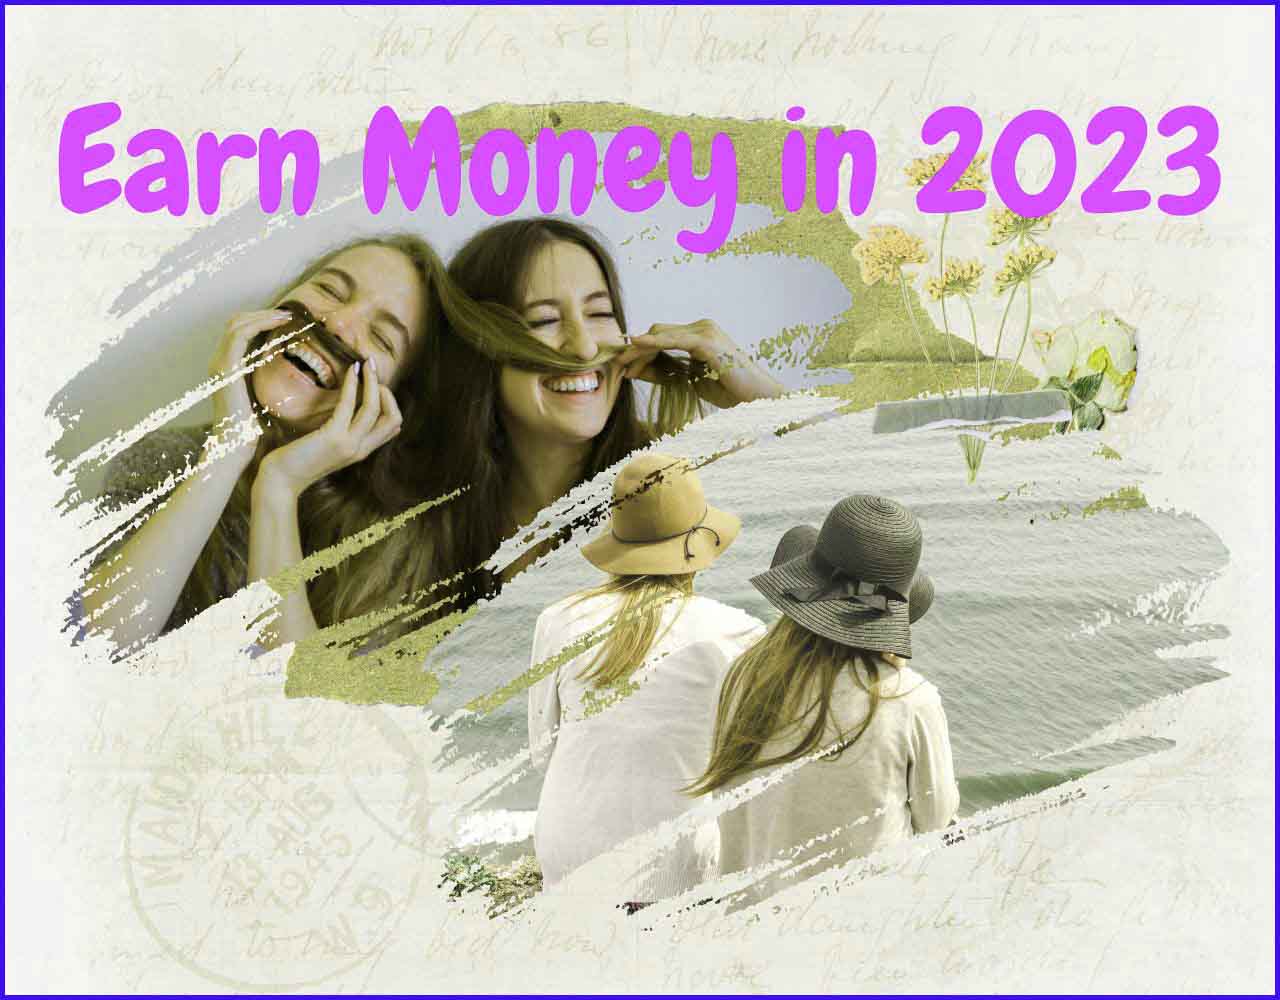 Earn Money in 2023: Earn money while studying in college